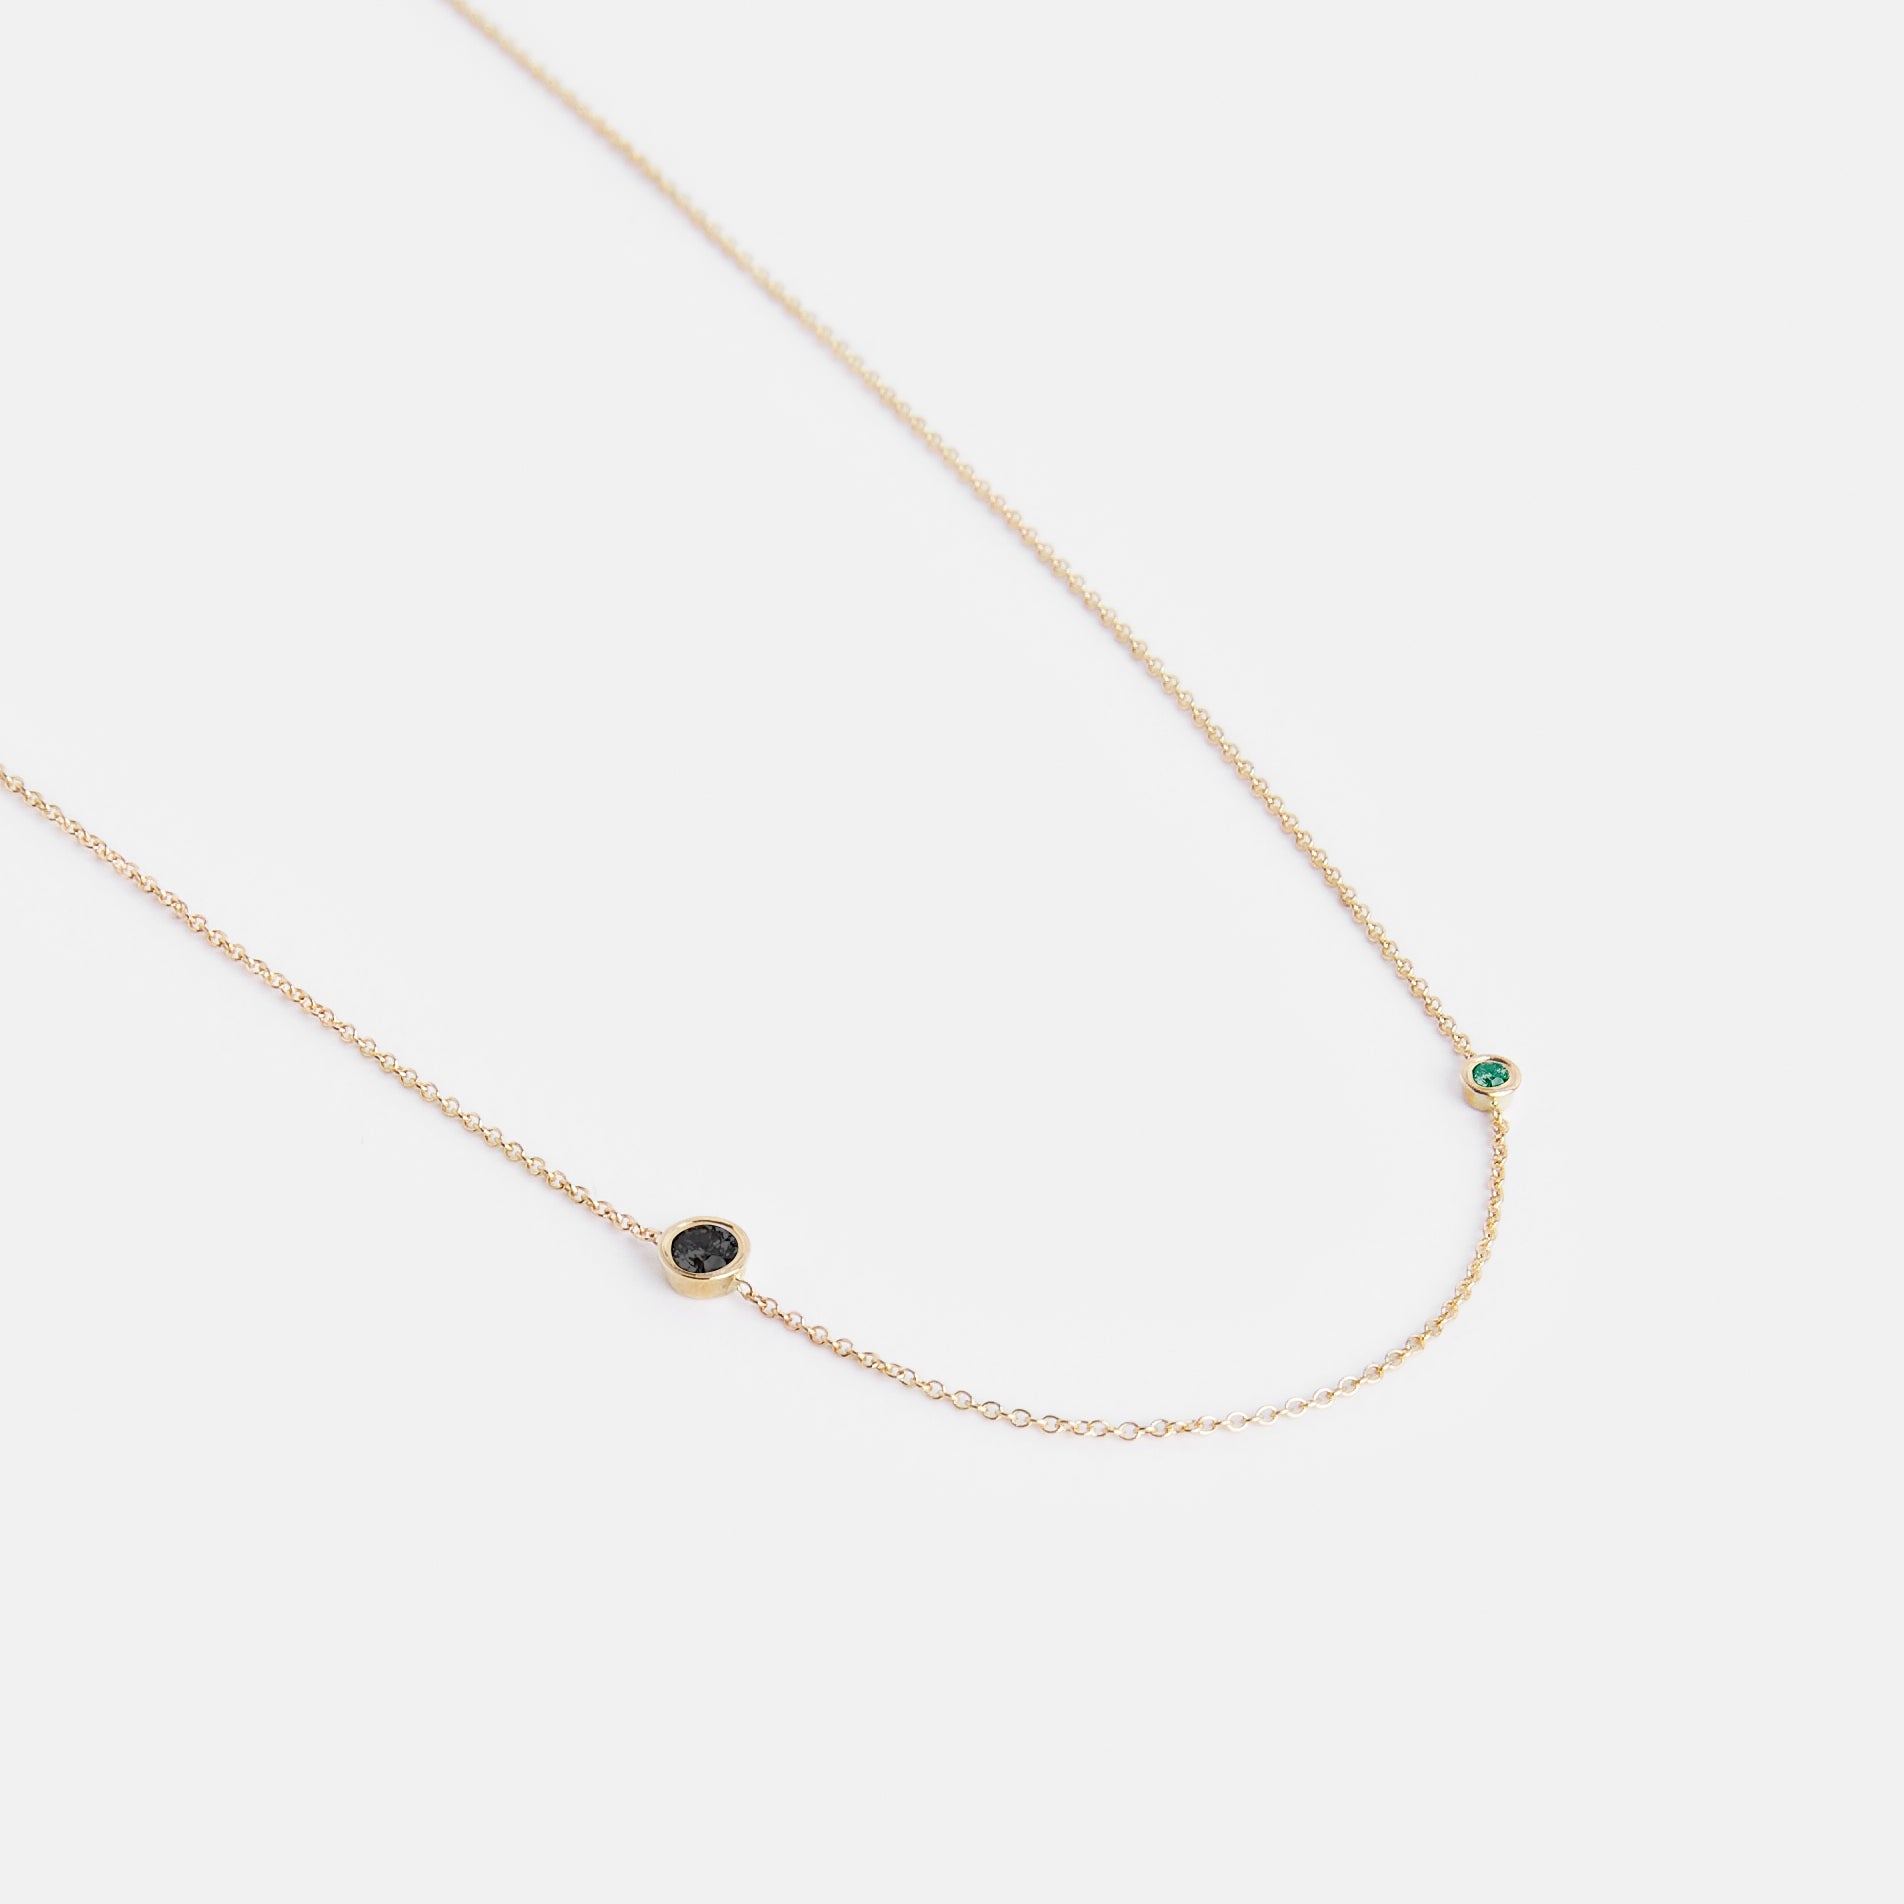 Iba Simple Necklace in 14k Gold set with Black Diamond and Emerald By SHW Fine Jewelry NYC